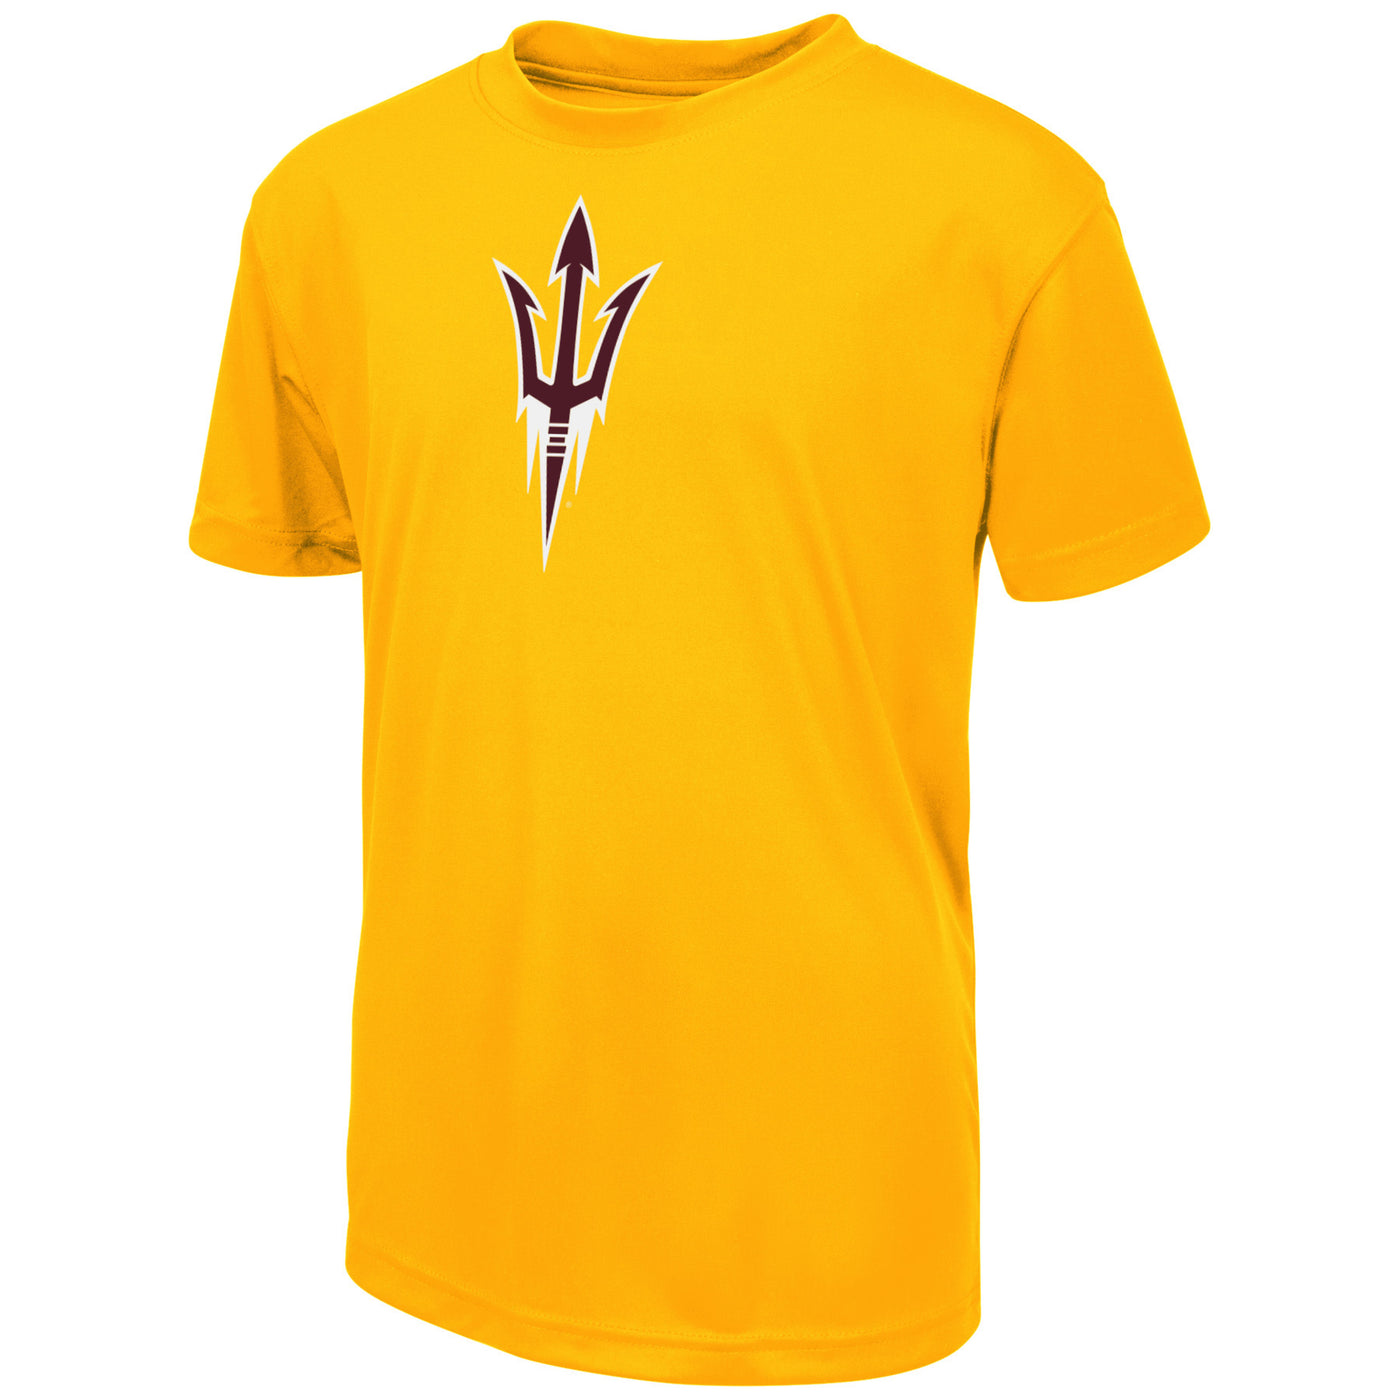 ASU youth gold tee with maroon pitchfork with white outline